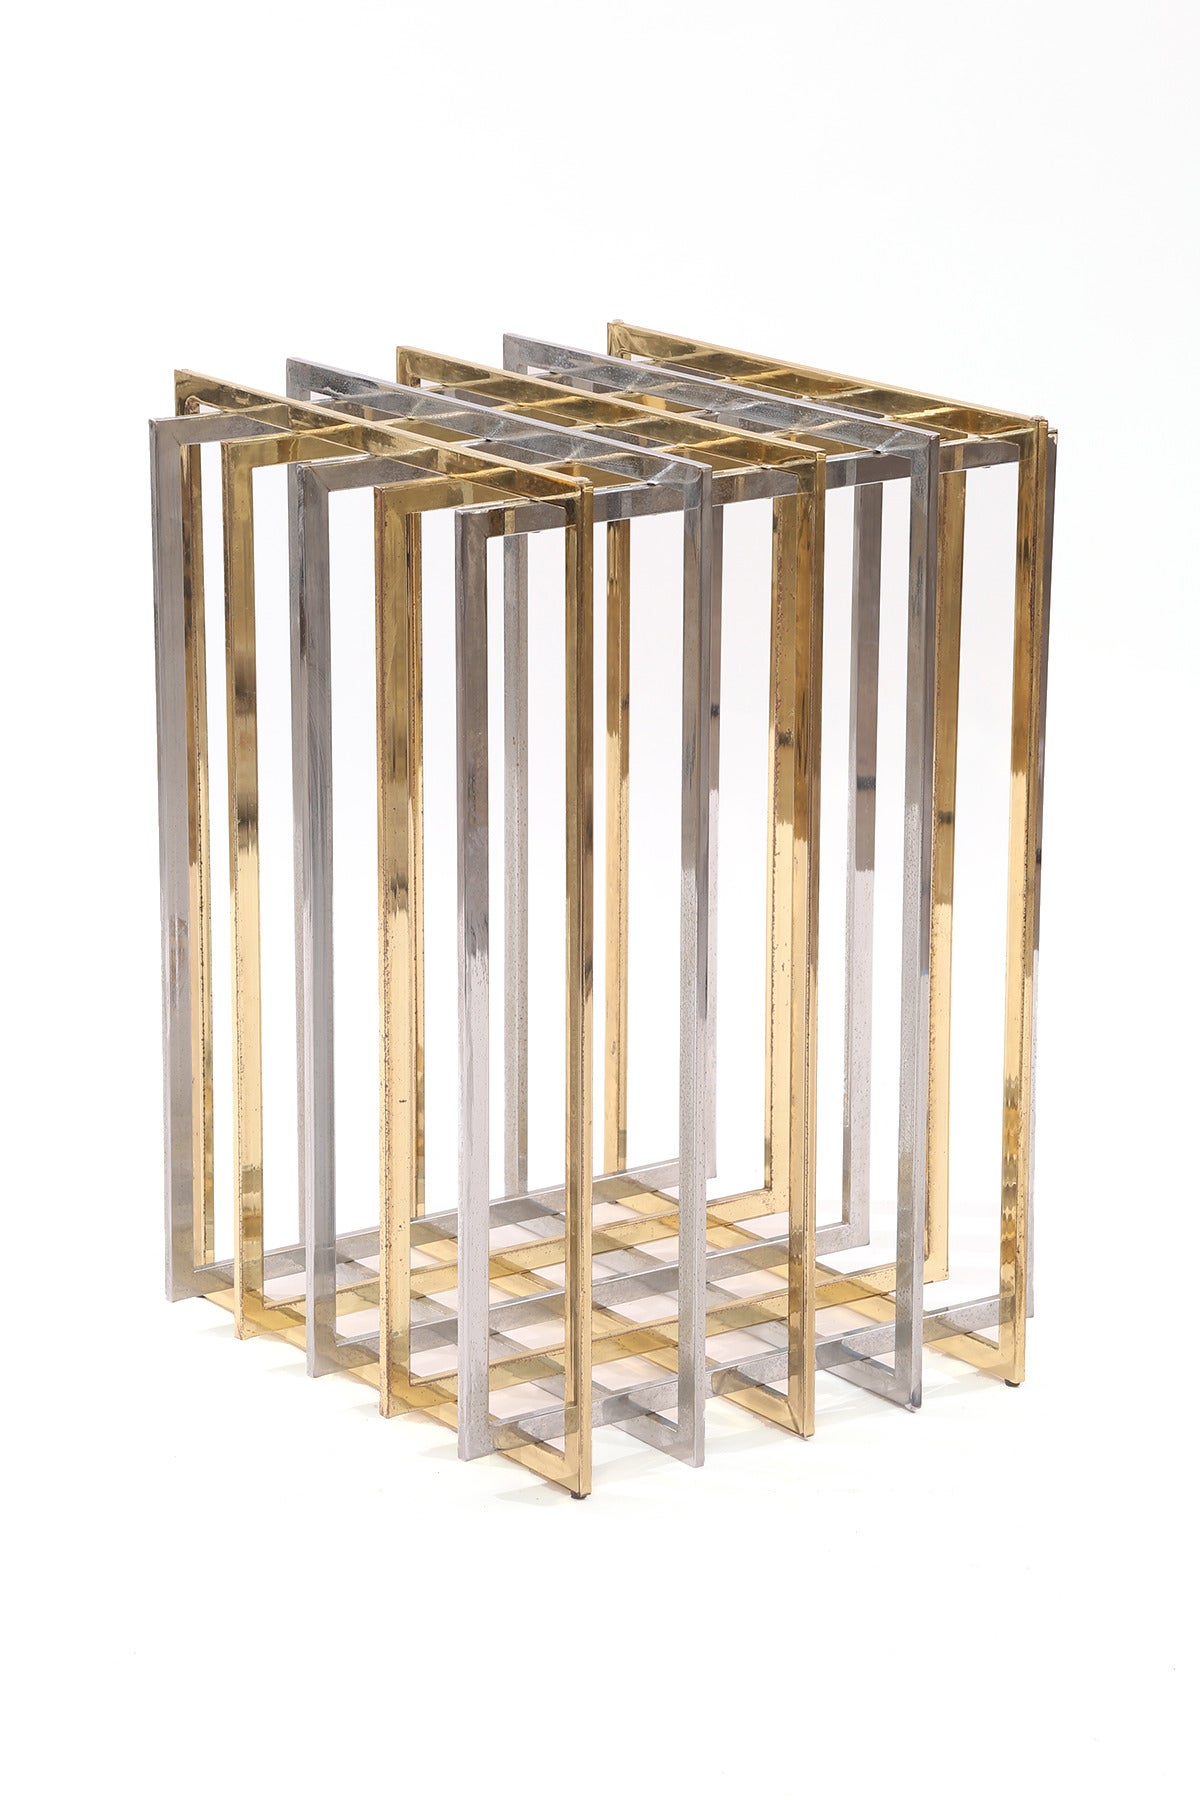 Brass and chrome dining table by Pierre Cardin, circa early 1970s. This example has alternating brass and chrome to form a grid and is shown with a 40